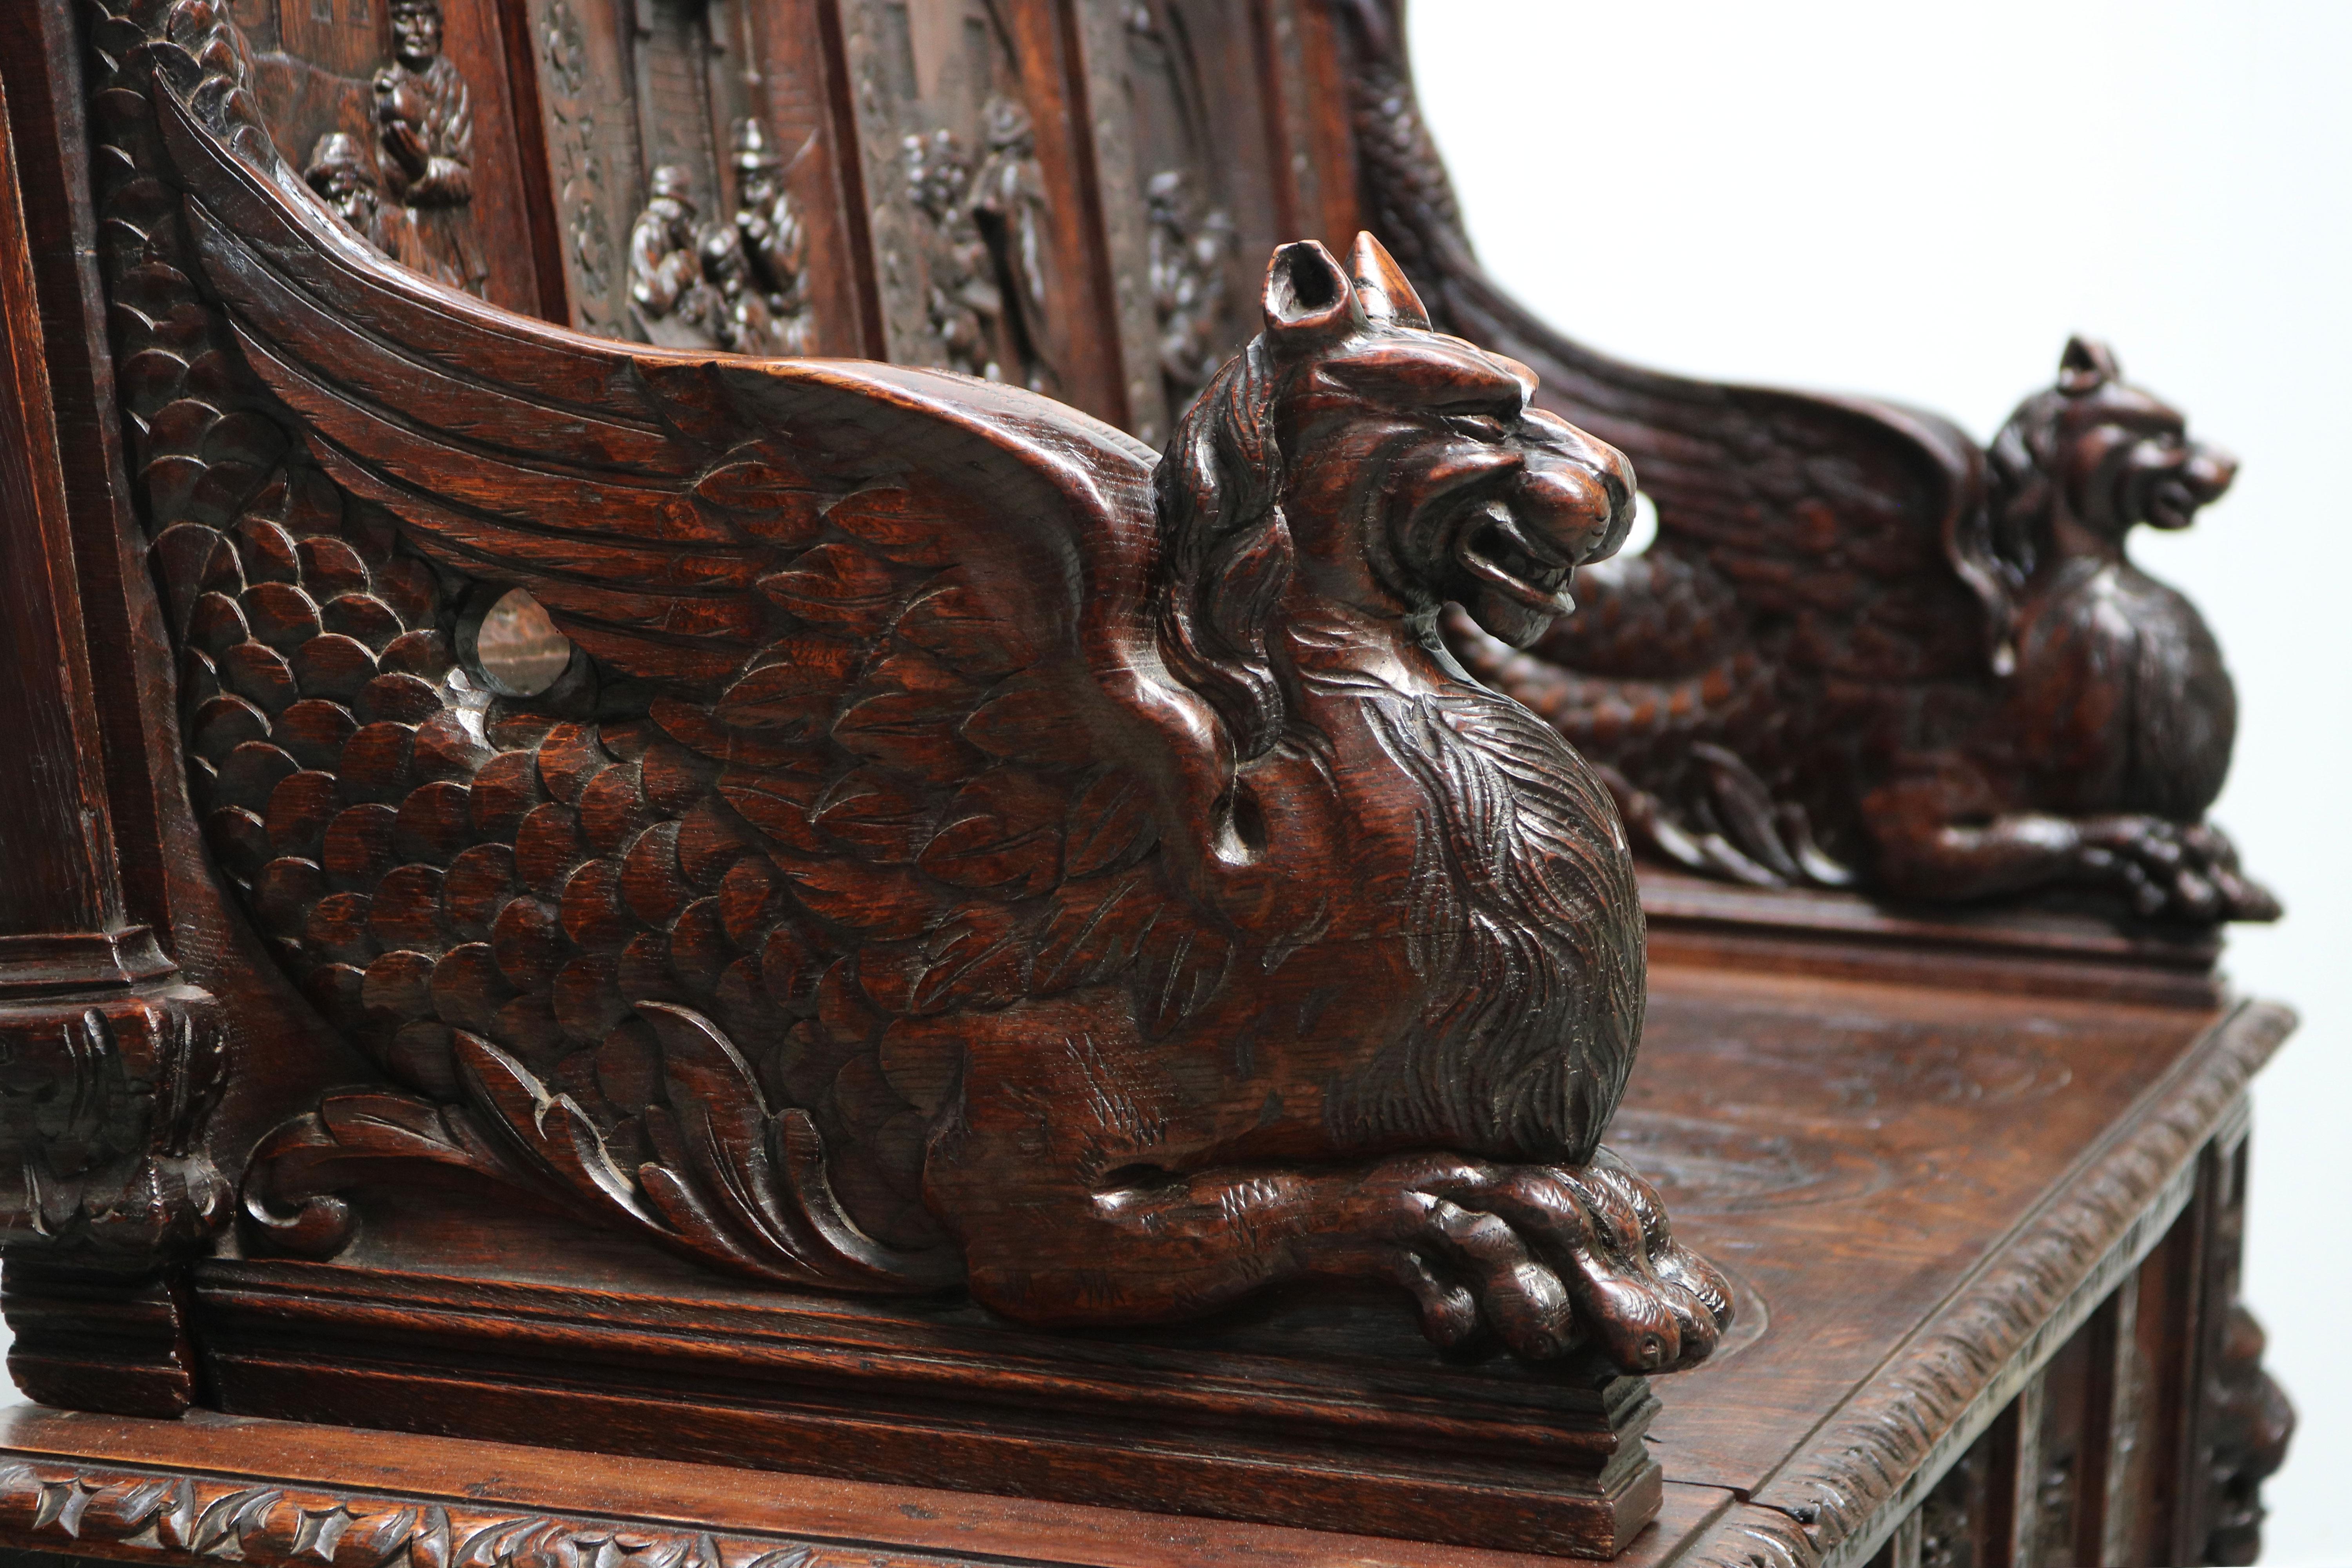 Most impressive & luxurious! This 19th century French antique Renaissance Revival / Breton style Hall bench with Impressive Gryphon armrests. 
Carved out of solid oak with numerous details & decorations all done by hand by a master carver. This